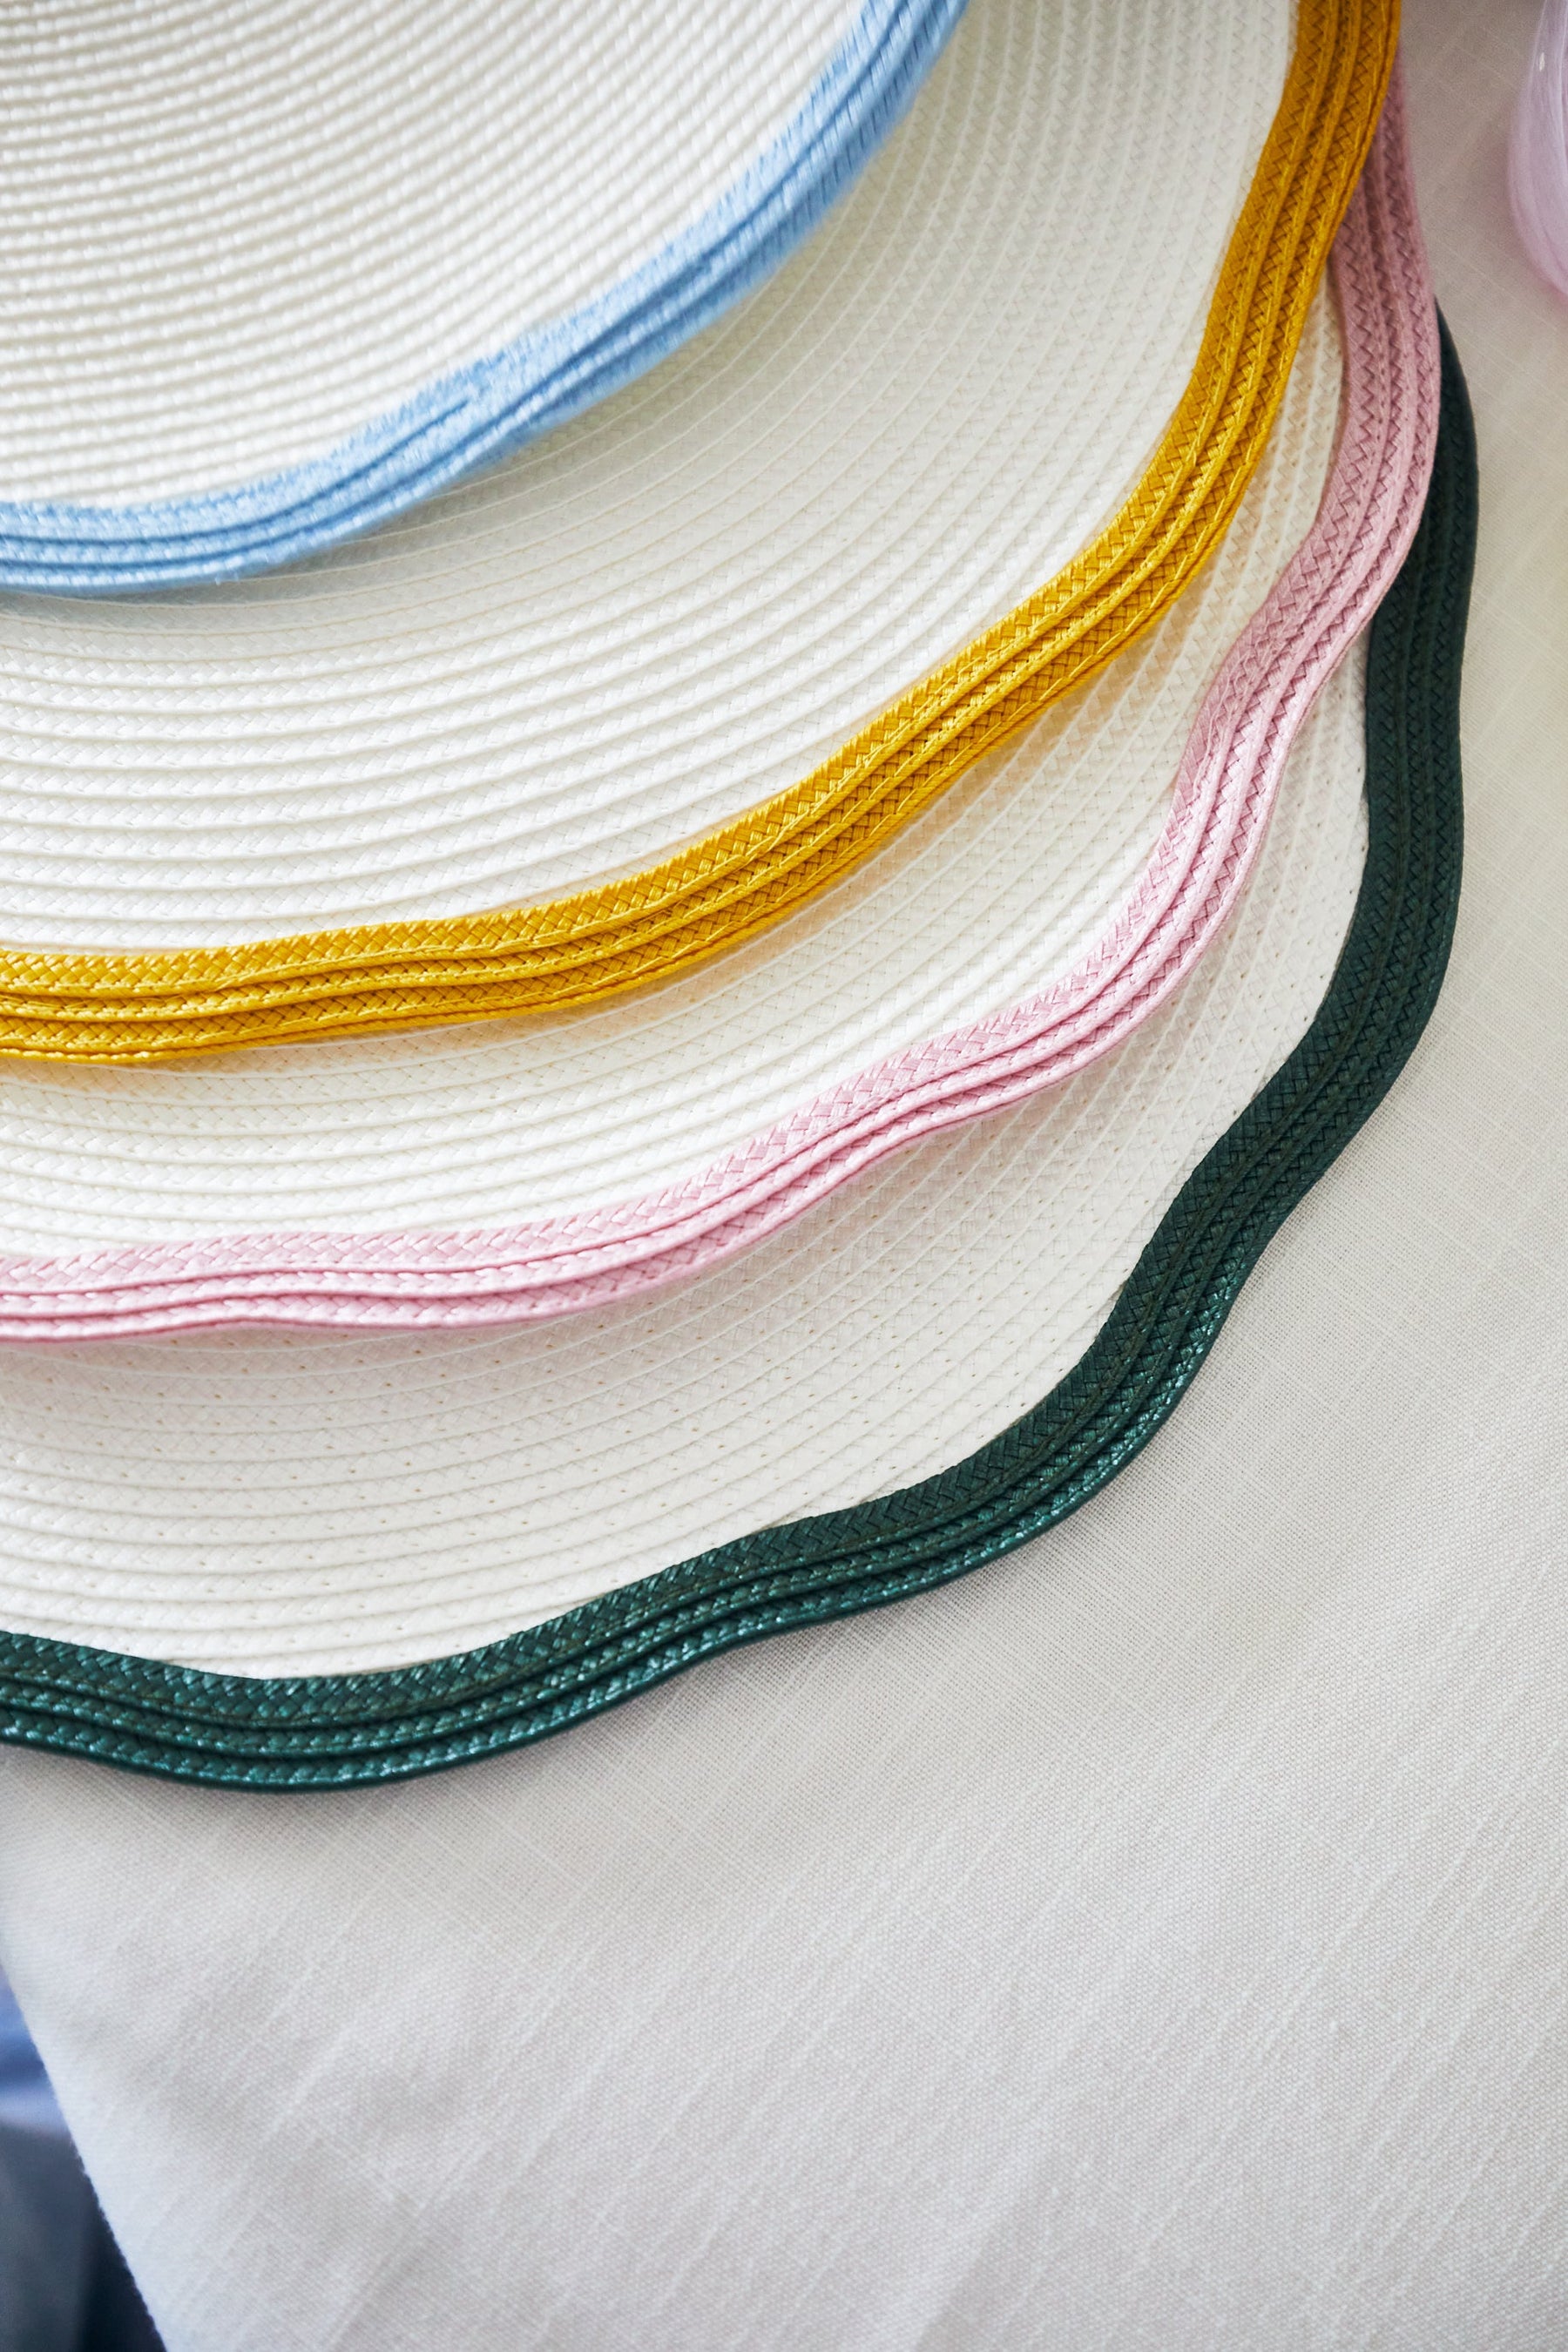 In The Round House | Straw Wave Placemats - Set of 4